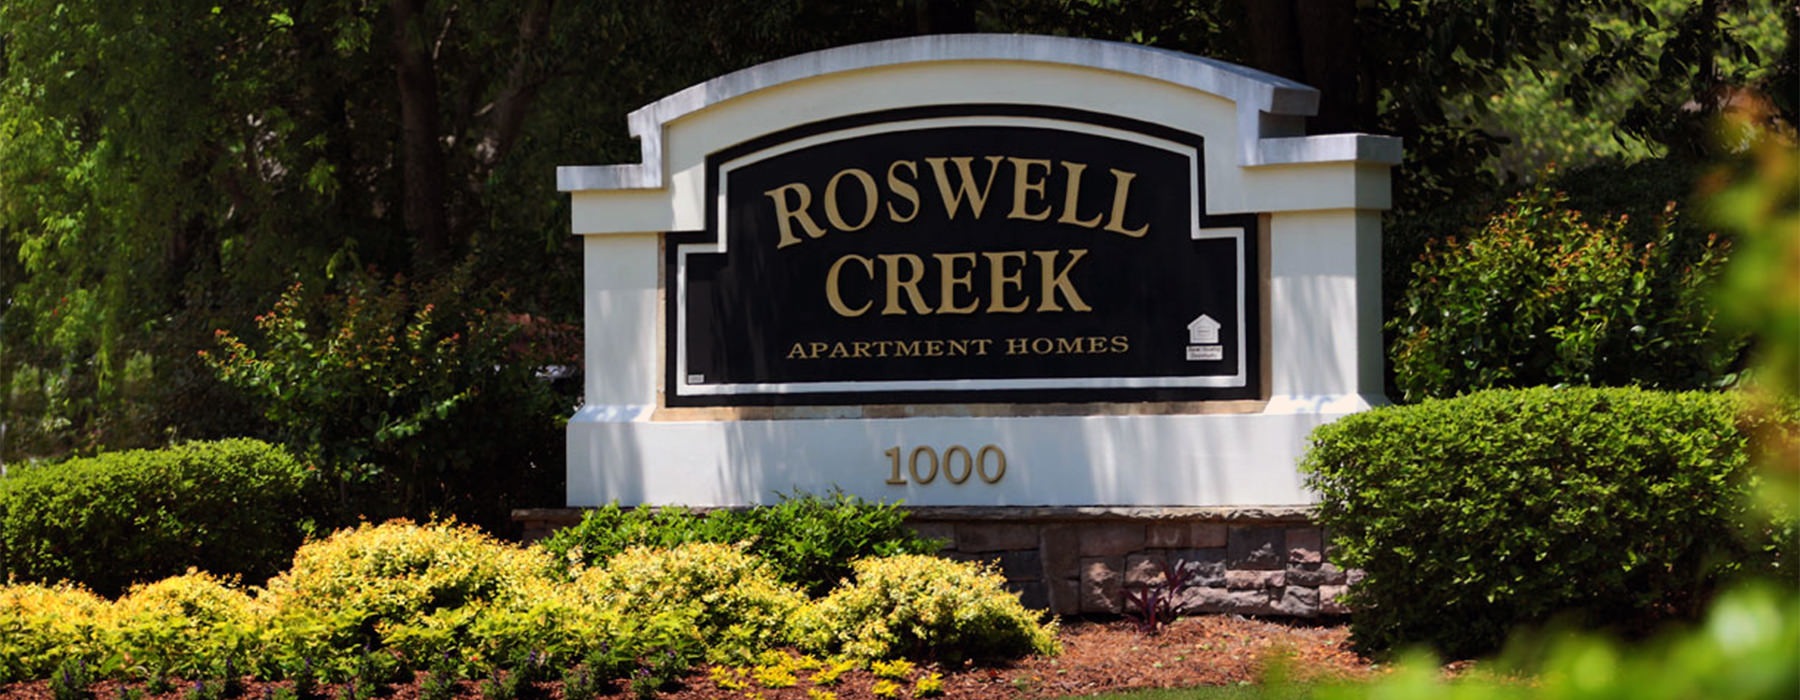 Roswell Creek Entrance sign with beautiful landscaping